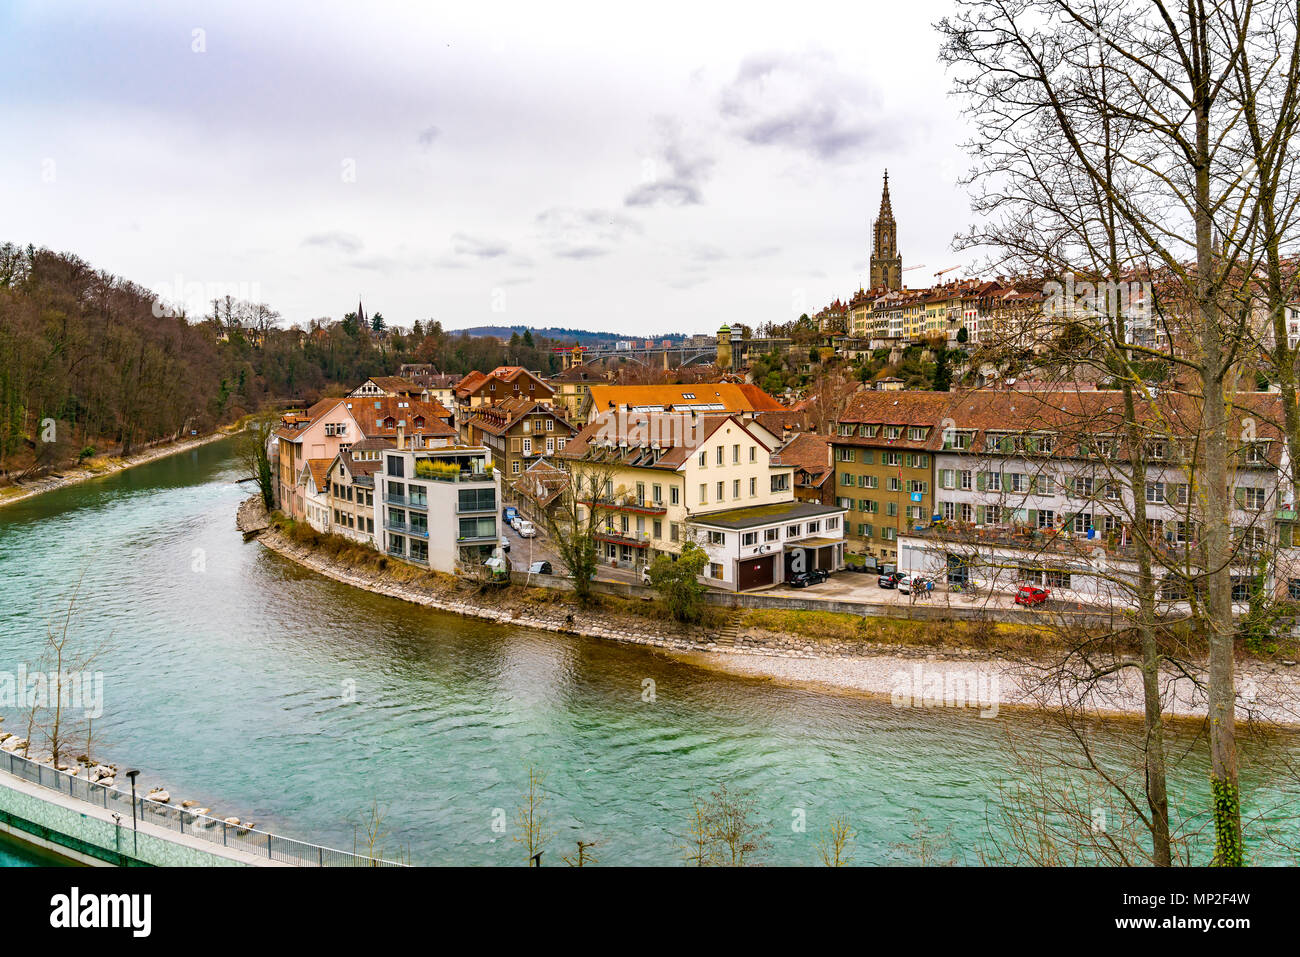 View of the old town of Bern with Berner Munster cathedral and the river Aare in Switzerland Stock Photo